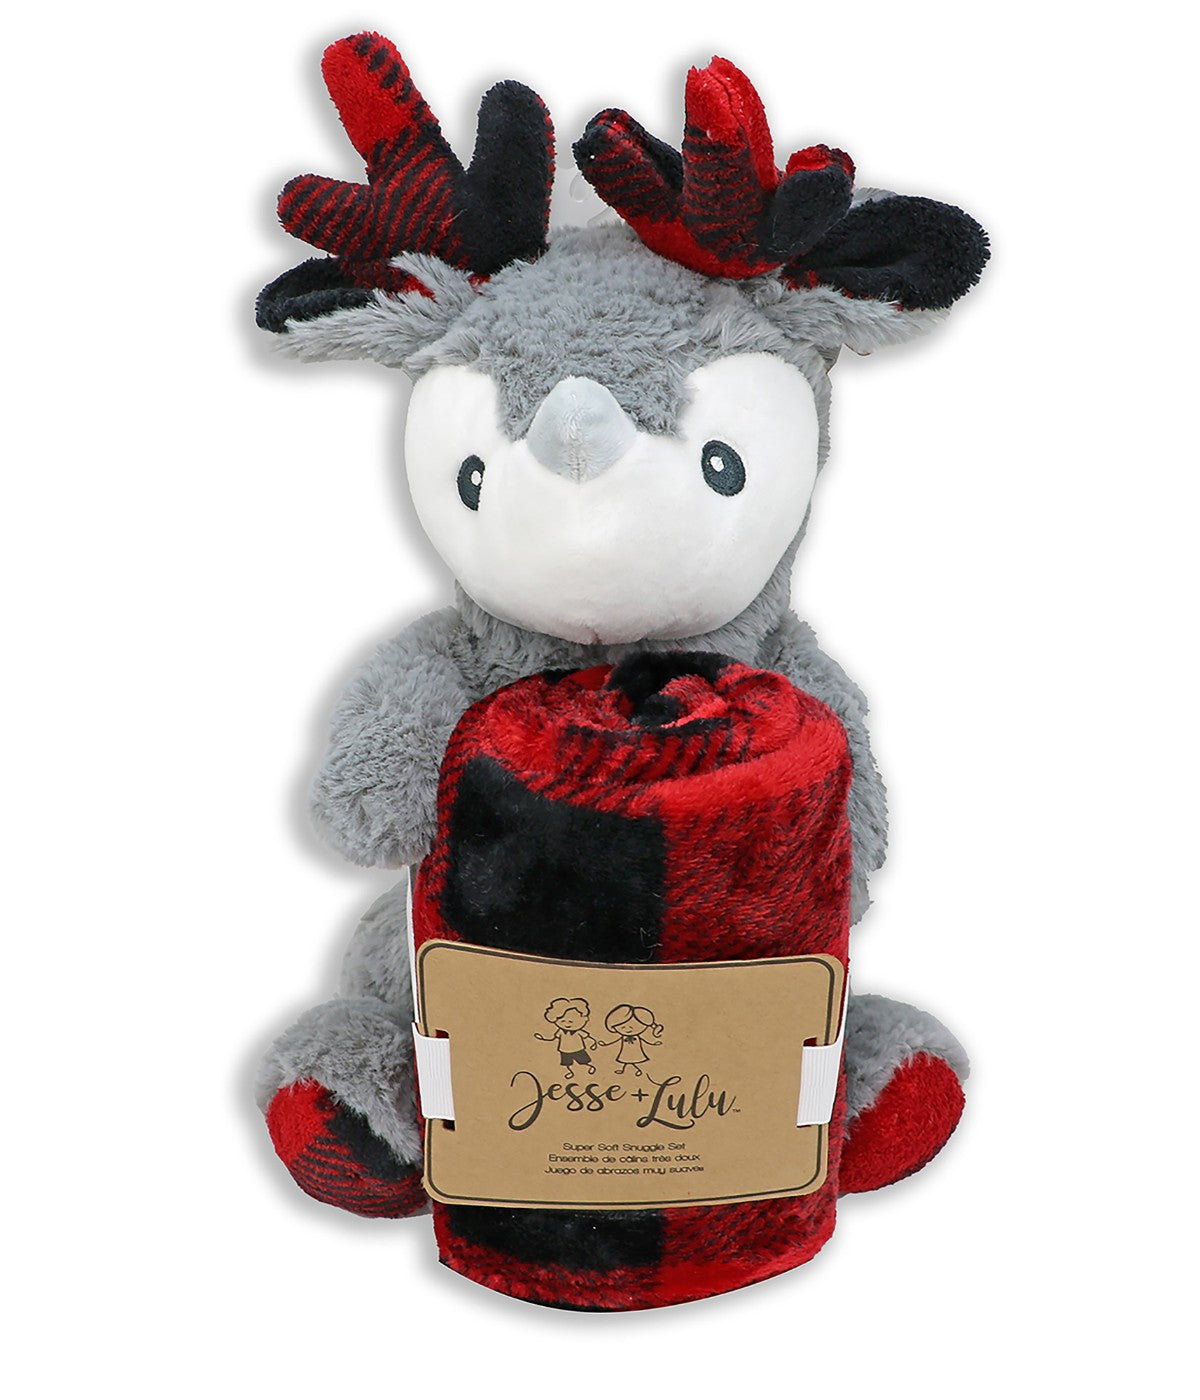 Check Blanket with Reindeer Plush Toy Red and Black